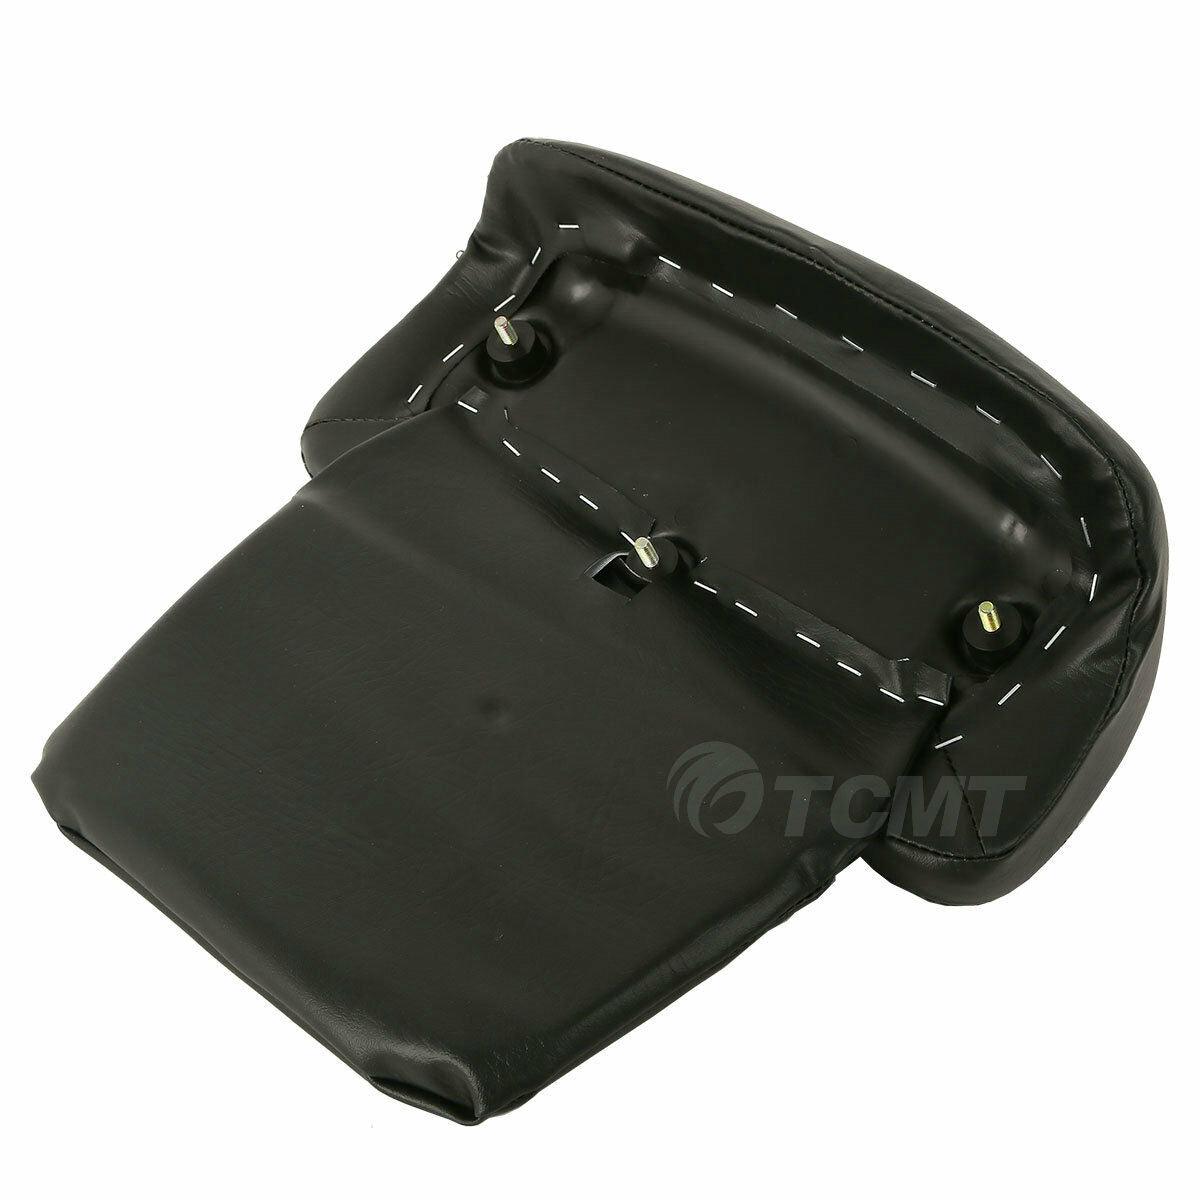 Razor Pack Trunk Pad Black Mount Rack Fit For Harley Tour Pak Sport Glide 18-22 - Moto Life Products